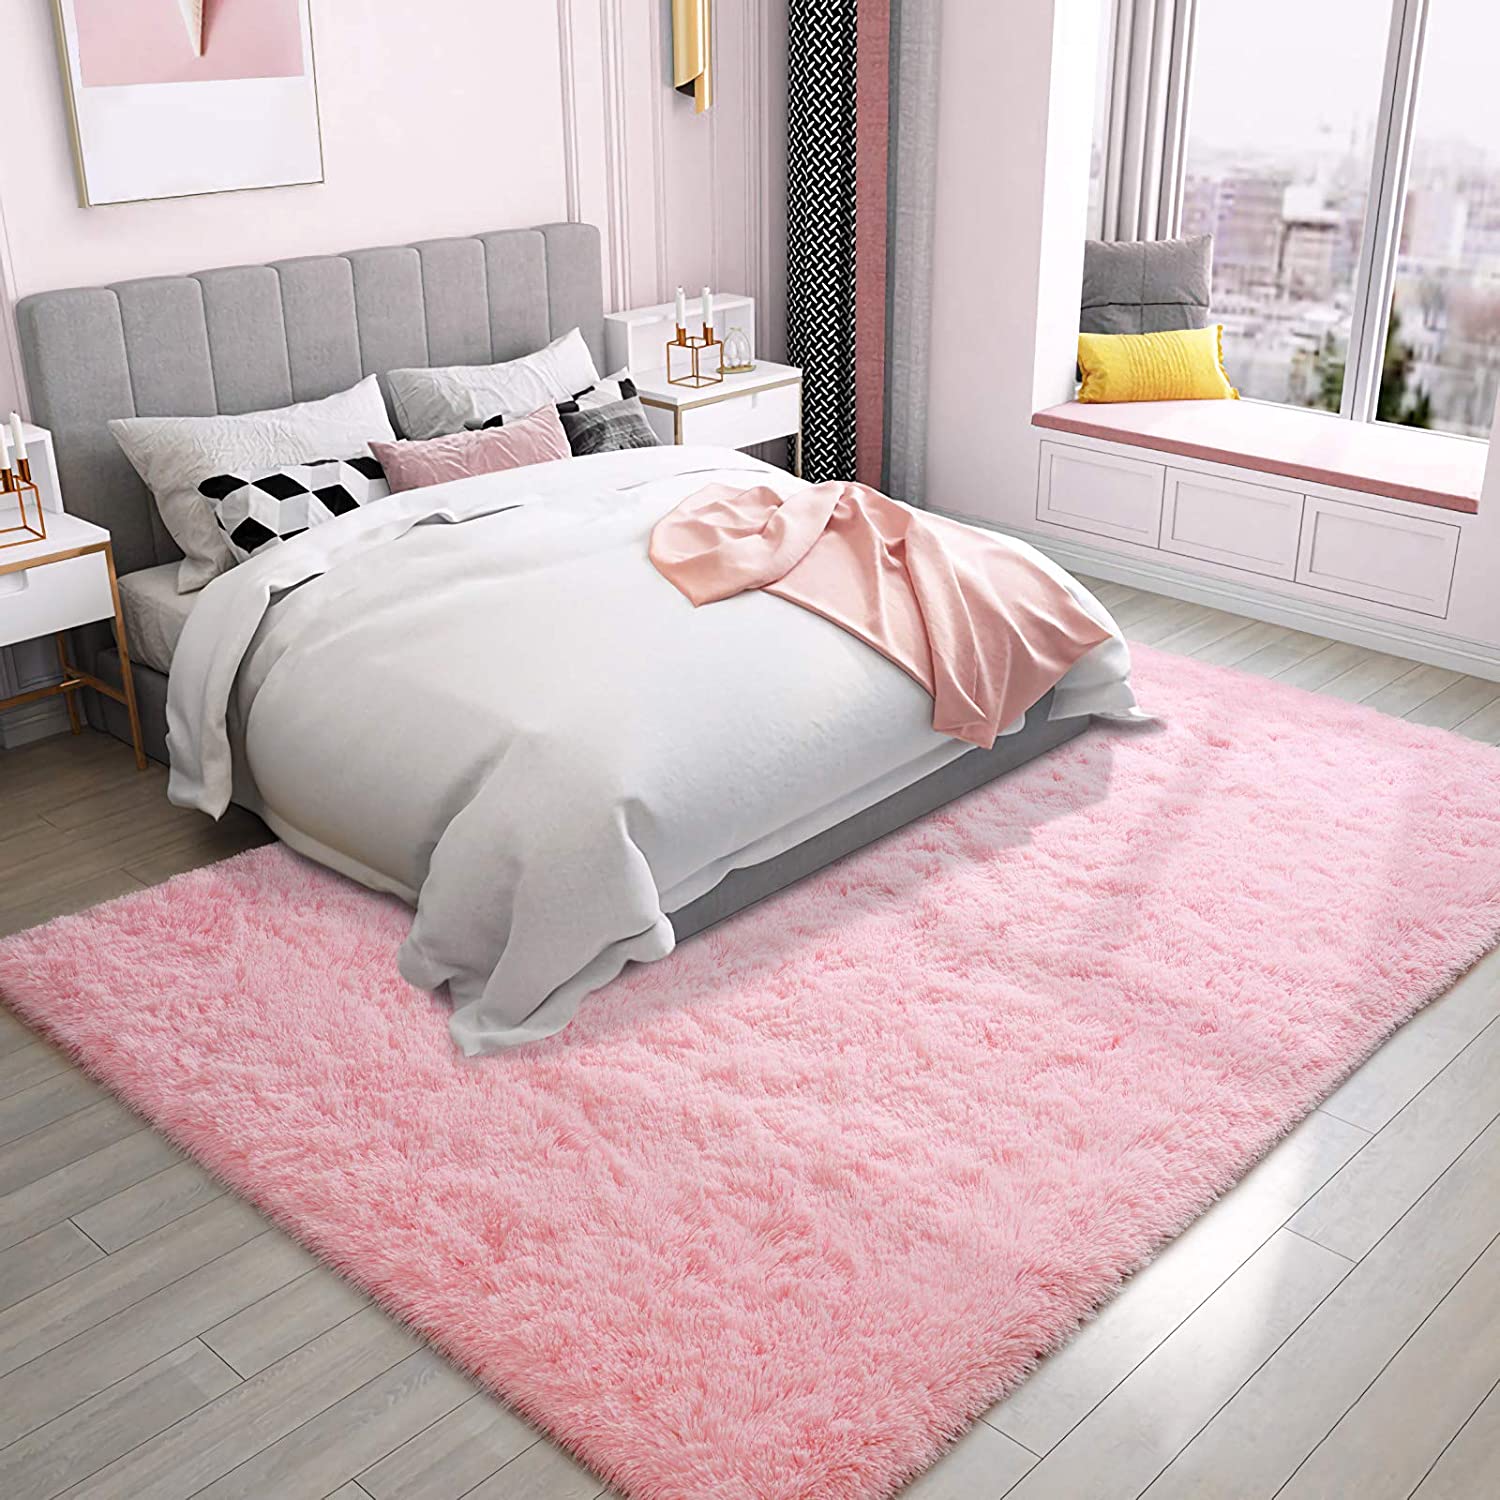 Noahas Soft Fluffy Area Rug for Living Room Bedroom Shaggy Accent Carpets for Kids Girls Rooms Pink, 5 x 8 Feet - image 5 of 7